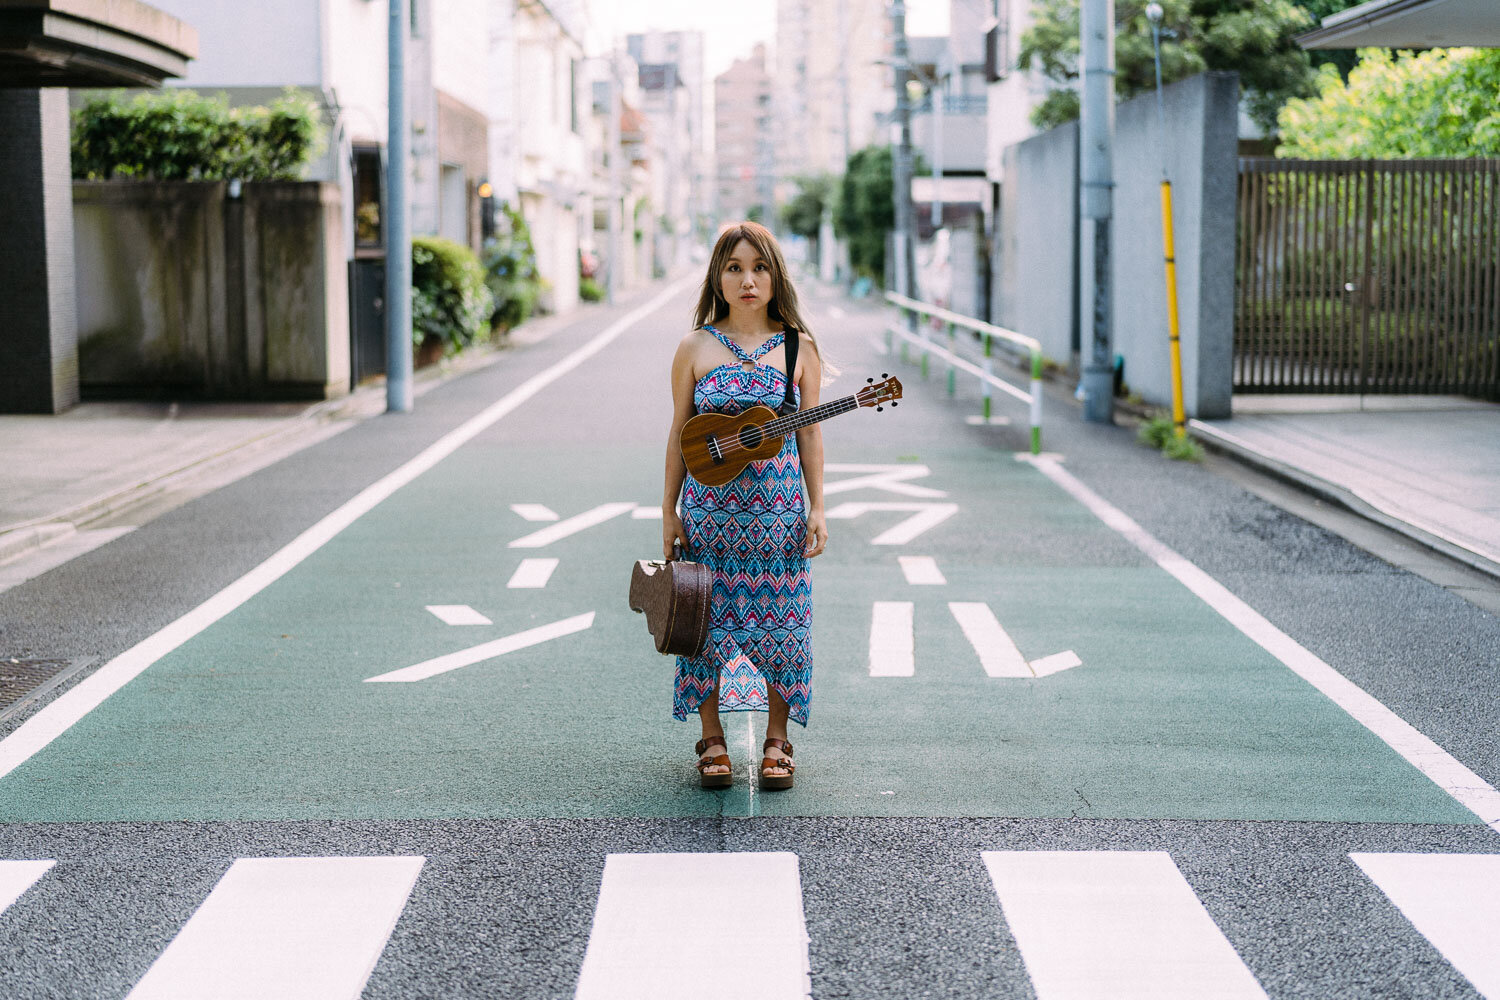 Fashion and Commercial photographer in Tokyo